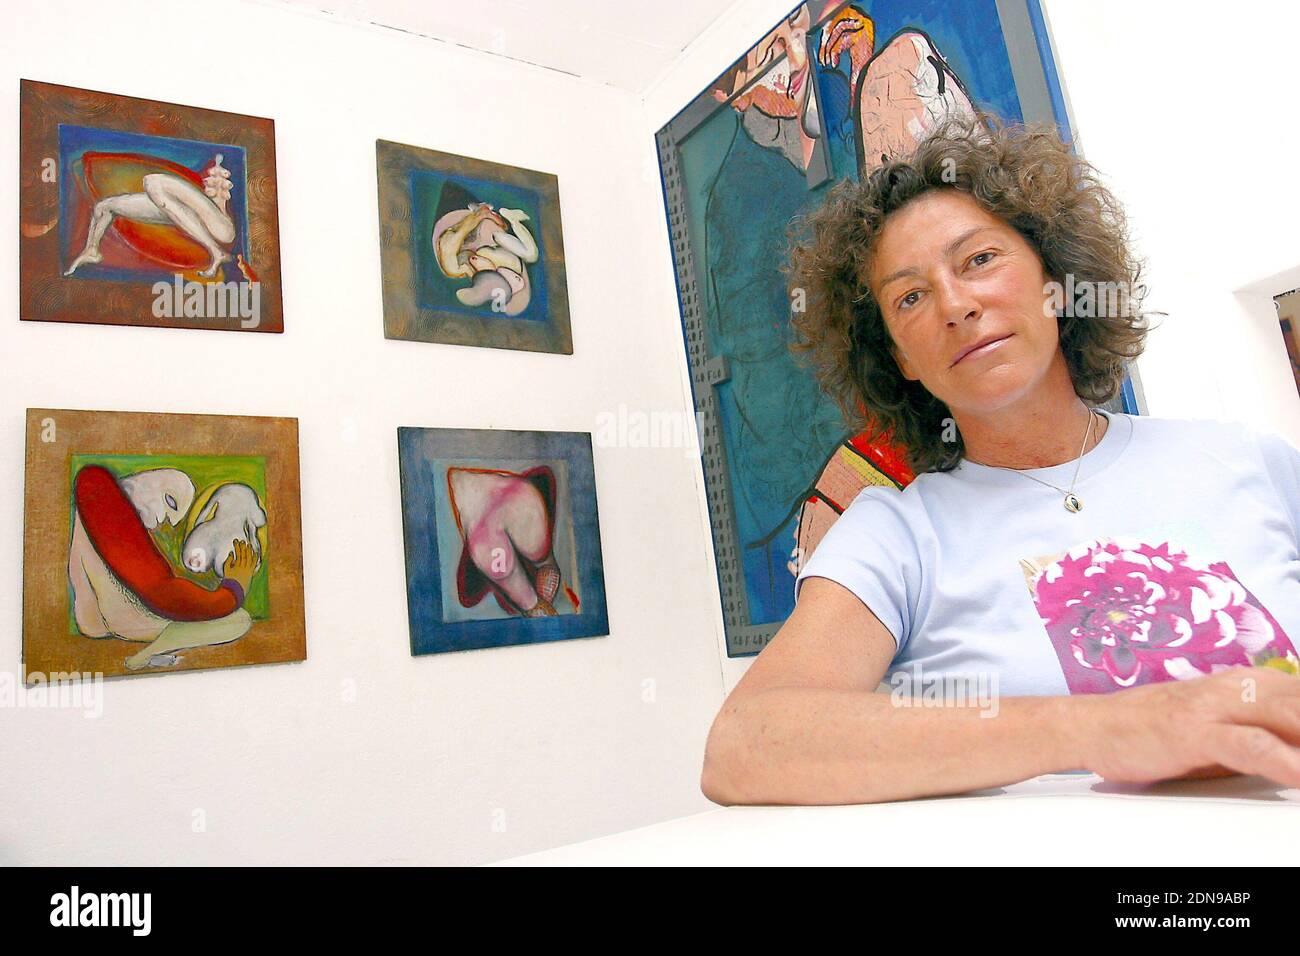 File photo : EXCLUSIVE. French skipper Florence Arthaud poses in her Art gallery in Marseille's district 'La Madrague Montredon', southern France, on May 4, 2005. Eight French nationals and their two Argentine pilots all died when two helicopters collided in La Rioja province in north-west Argentina. Yachtswoman Florence Arthaud, Olympic swimmer Camille Muffat and Olympic boxer Alexis Vastine all died. The helicopters were involved in the filming of TV survival show Dropped. Photo by Gerald Holubowicz/ABACA. Stock Photo